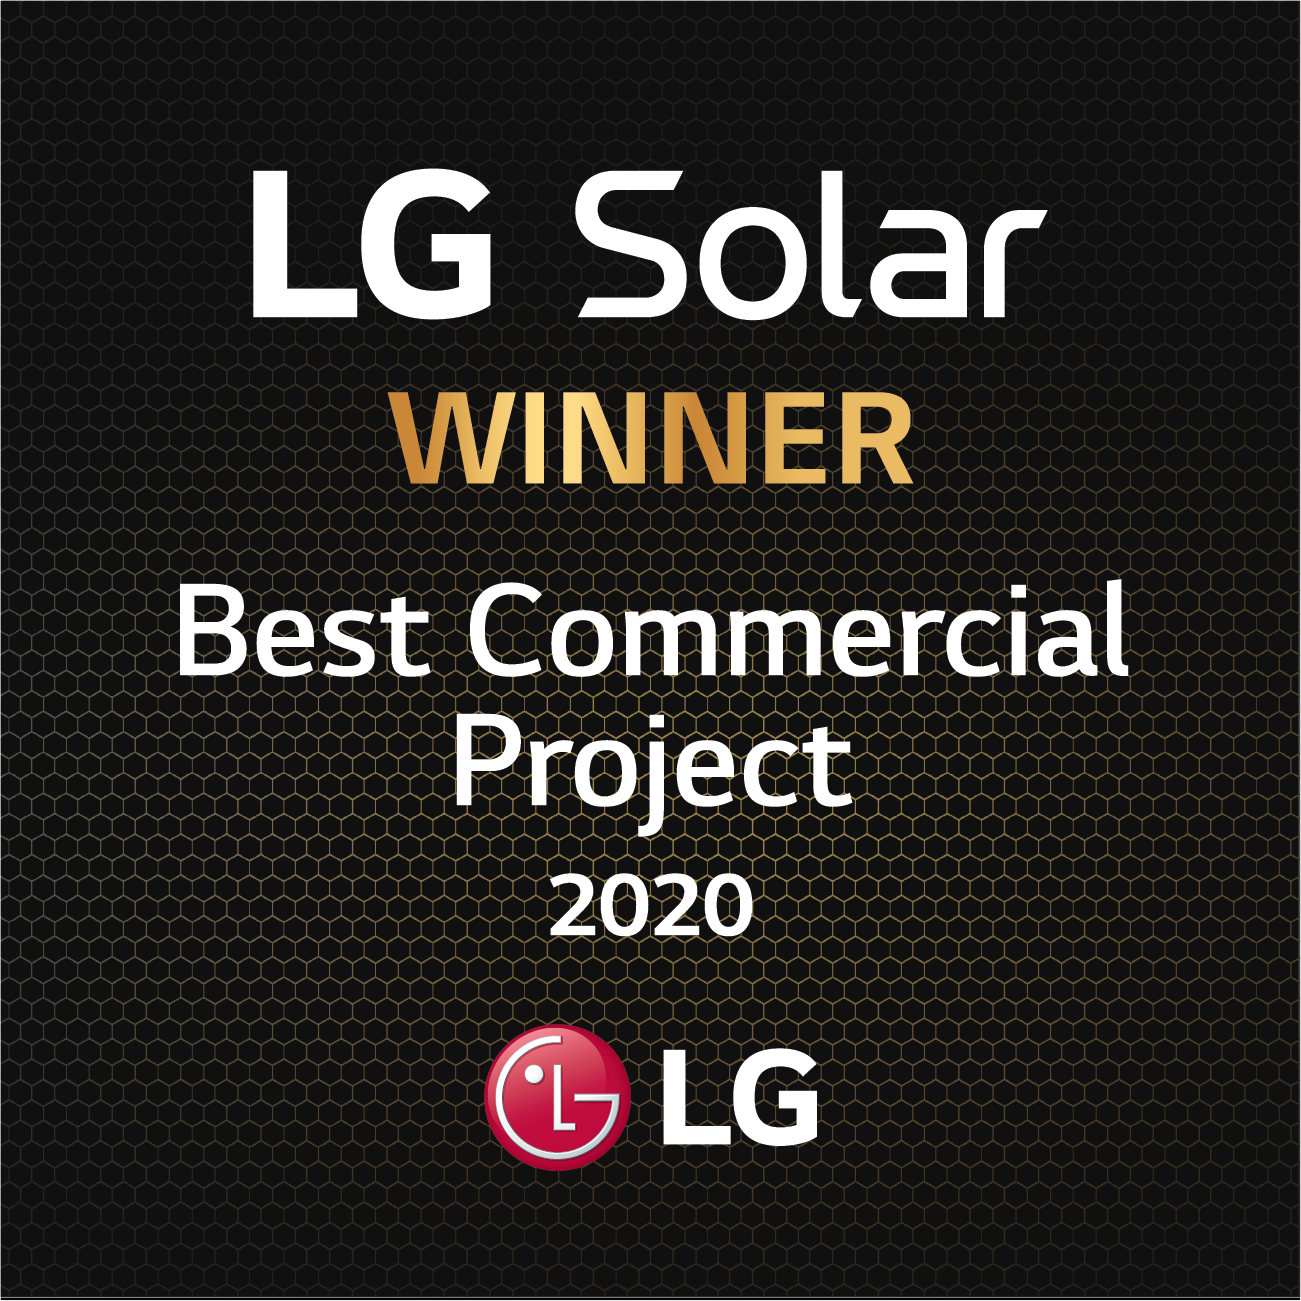 LG National Award: Smart Energy Answers Shines in 2020 - featured image